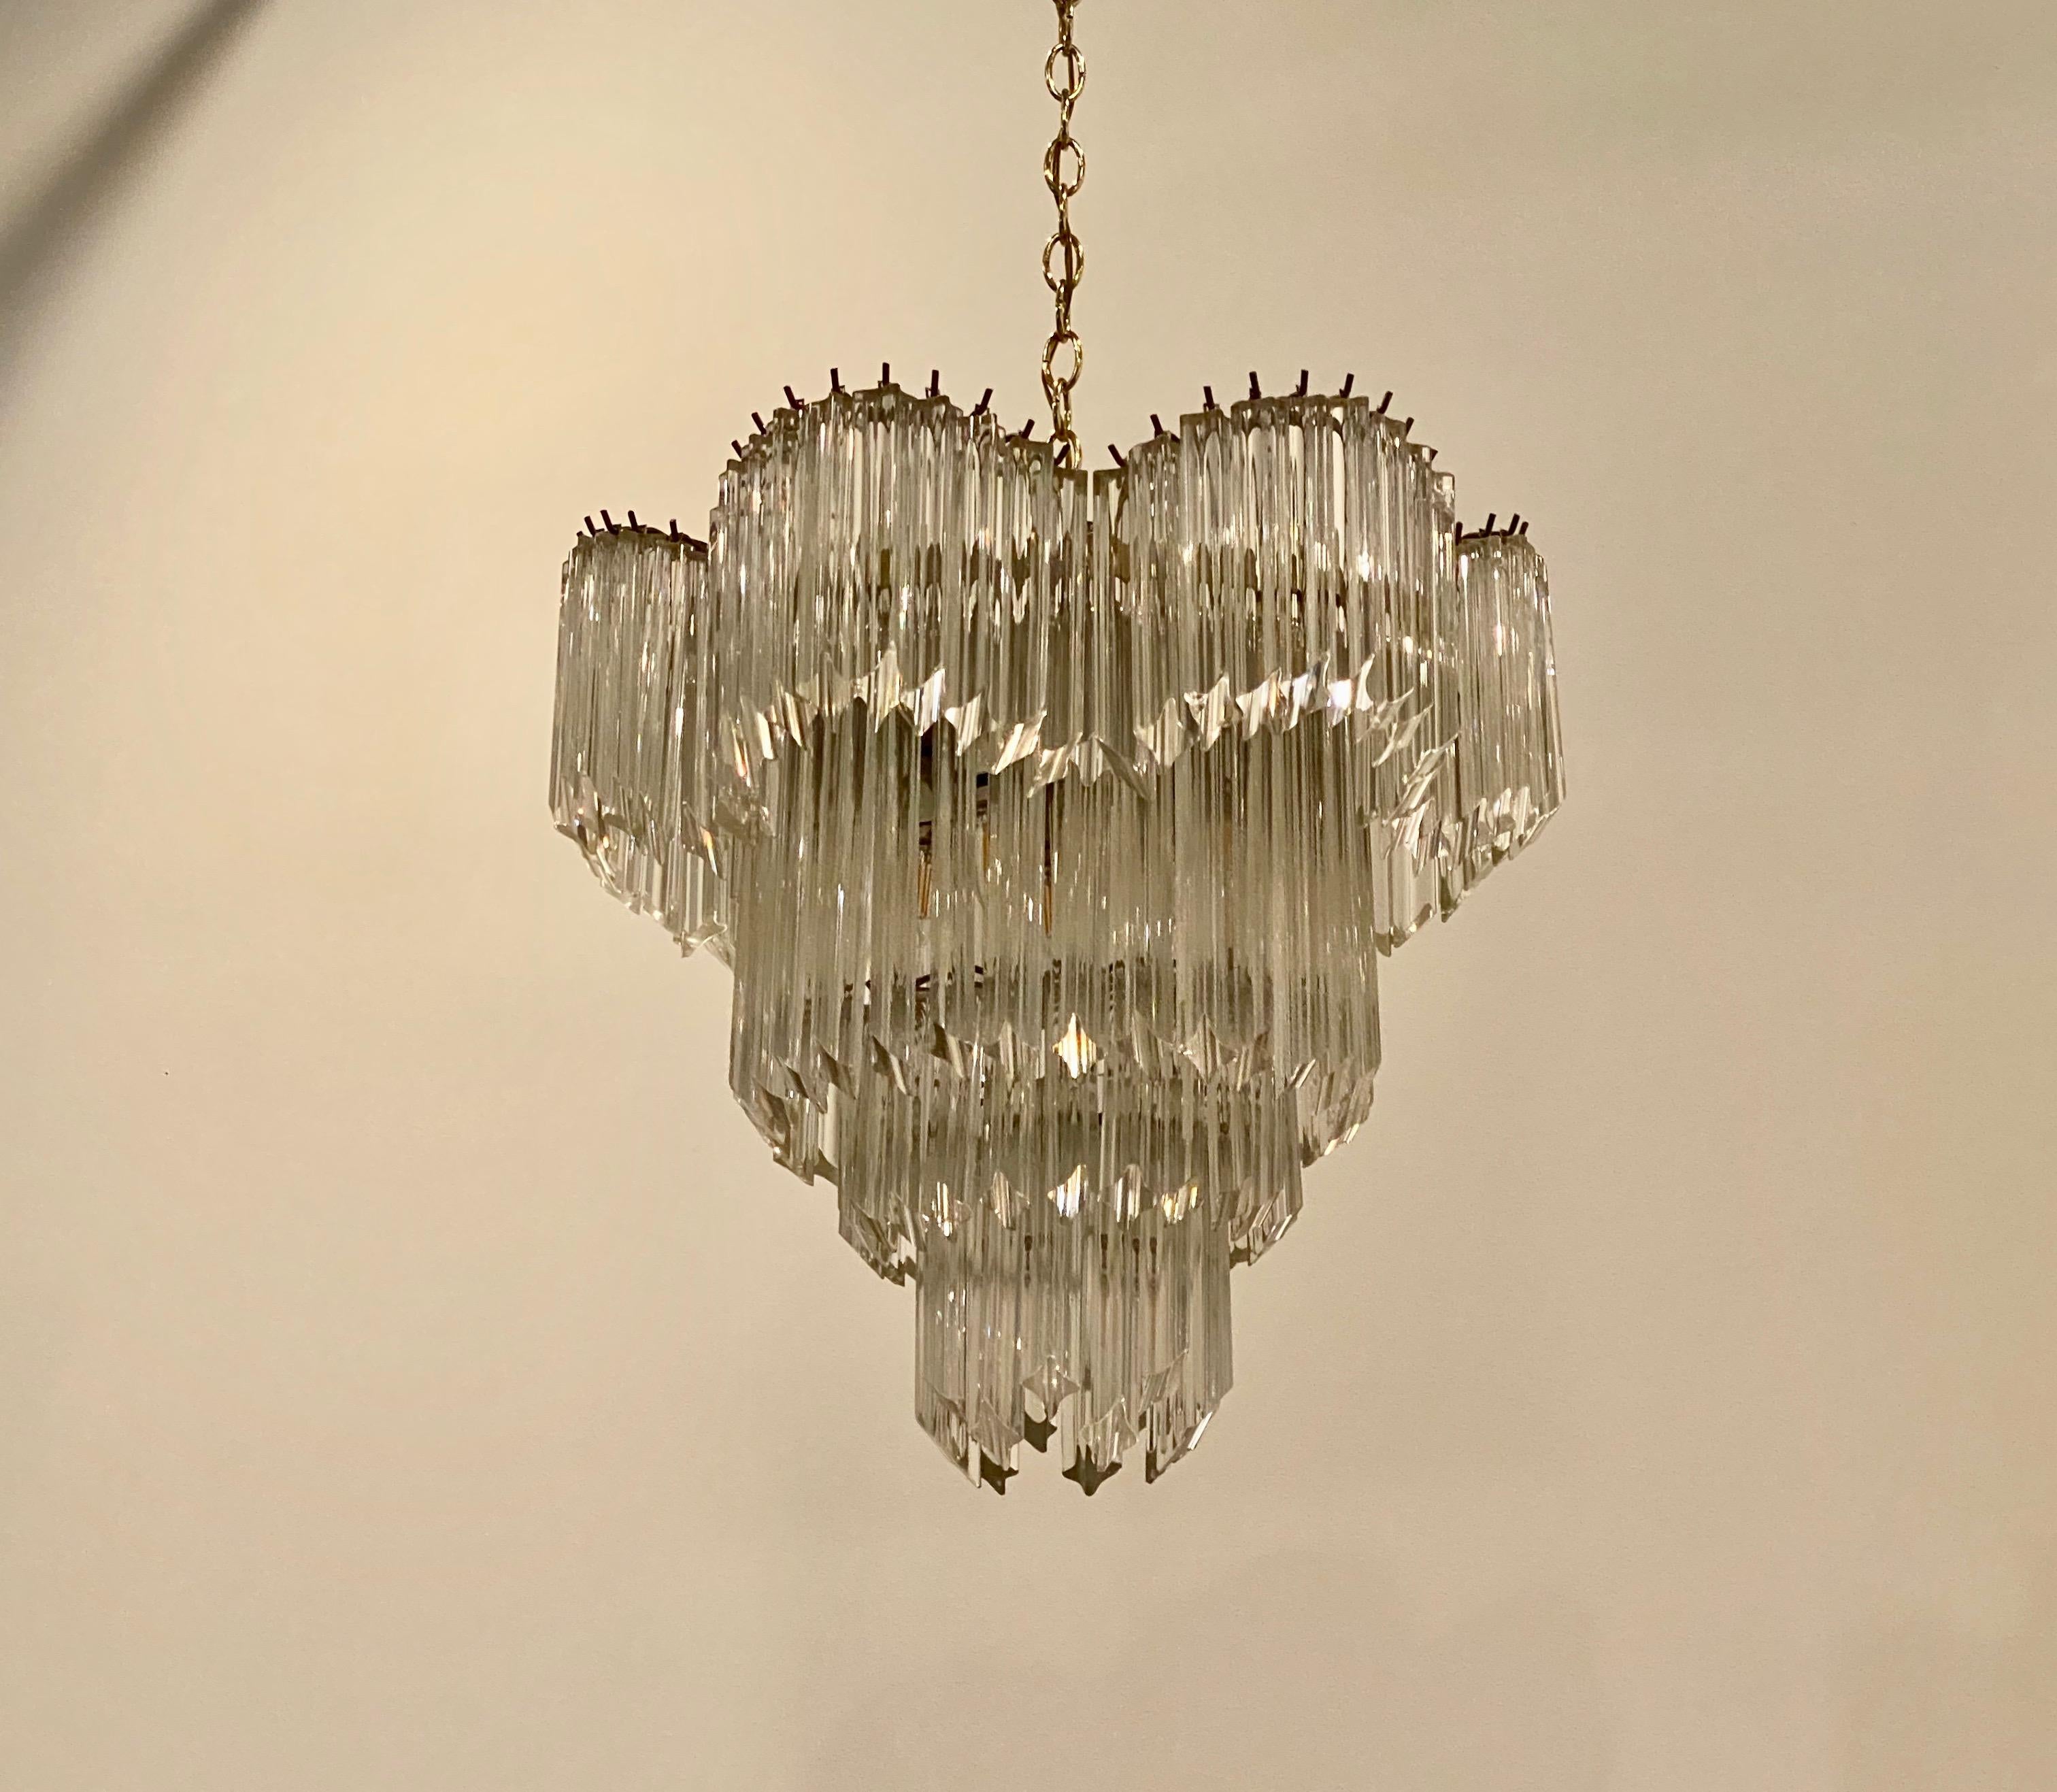 Mid-Century Modern Italian tiered chandelier. Each of the prisms are solid glass. They hang from hooks on a brass frame, as pictured. Any amount of chain can be added or subtracted for custom hanging length of the chandelier. Has been rewired for